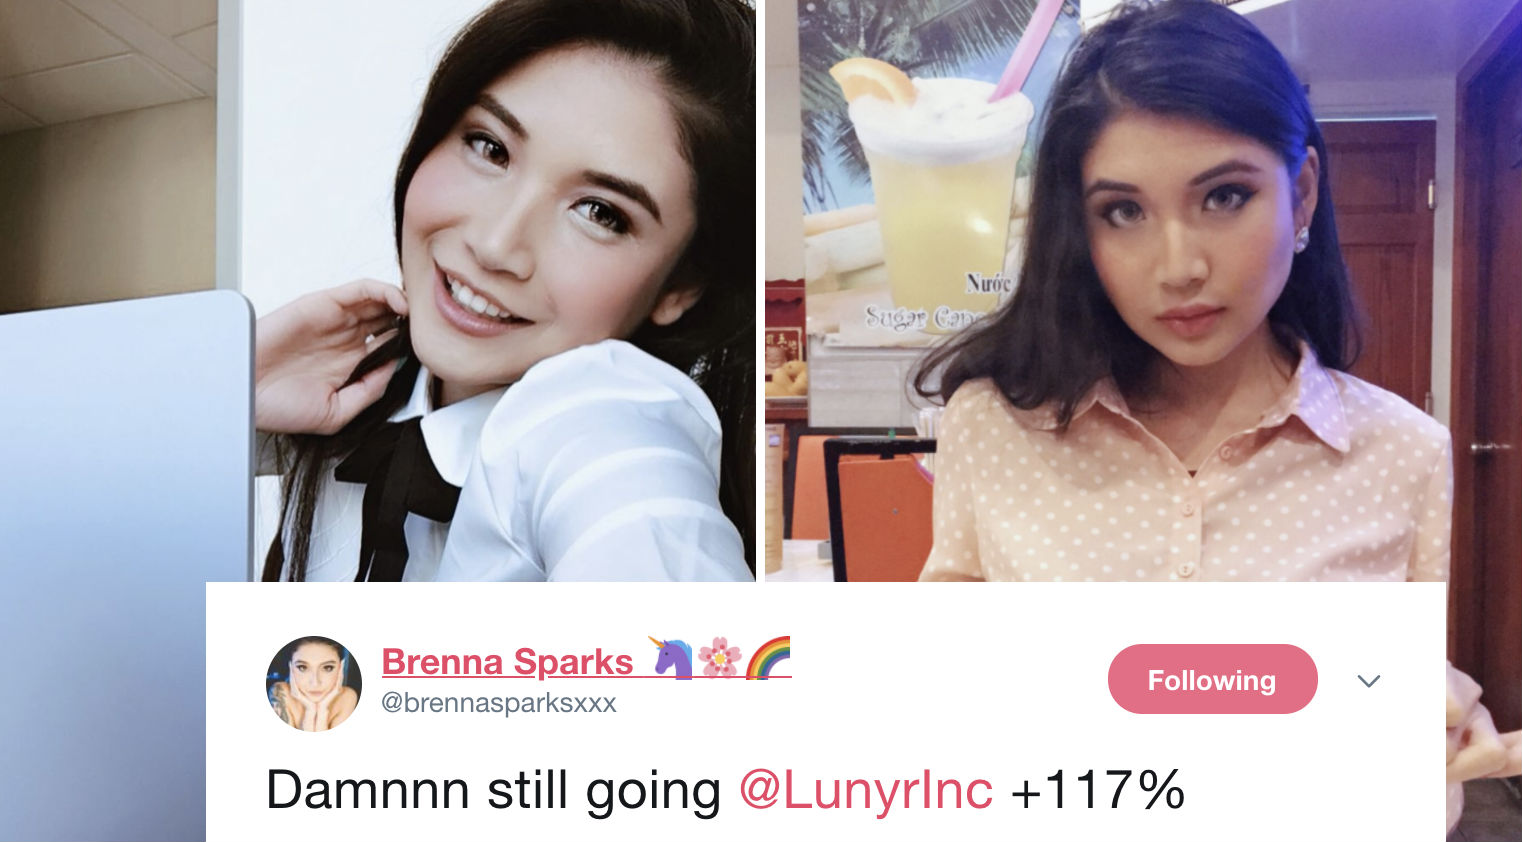 Laotian Adult Film Star Who Got into Bitcoin in Her Teens Now Averaging 1,100% ROI